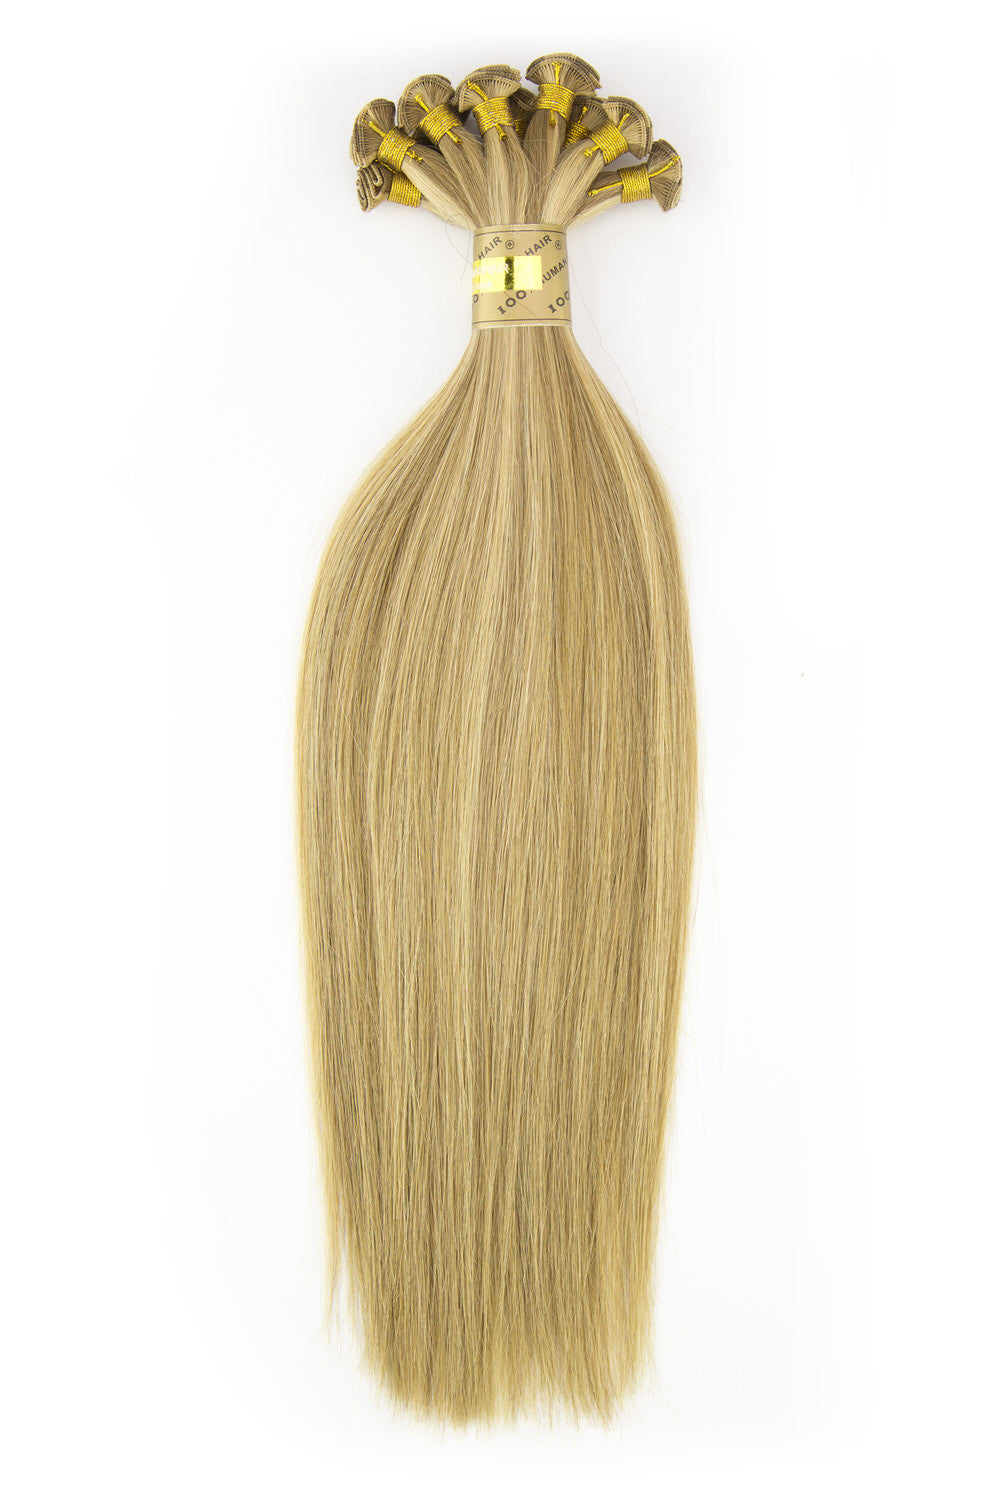 Classic - Hand Tied Silky Straight 22"